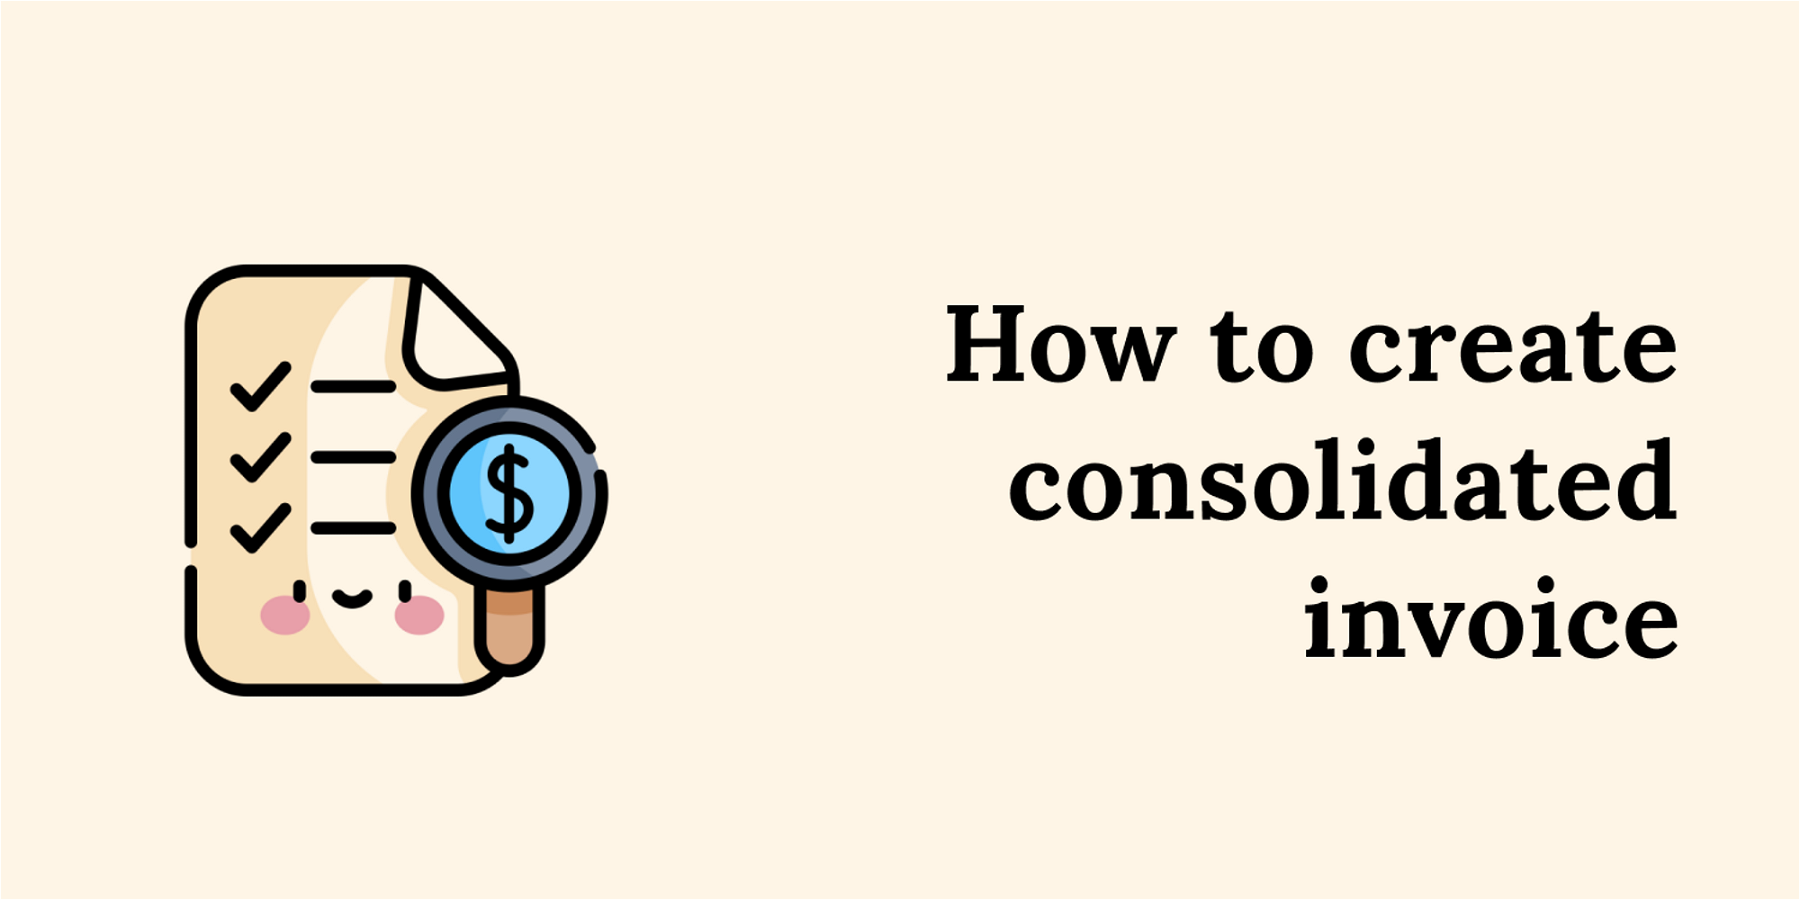 How to create consolidated invoice